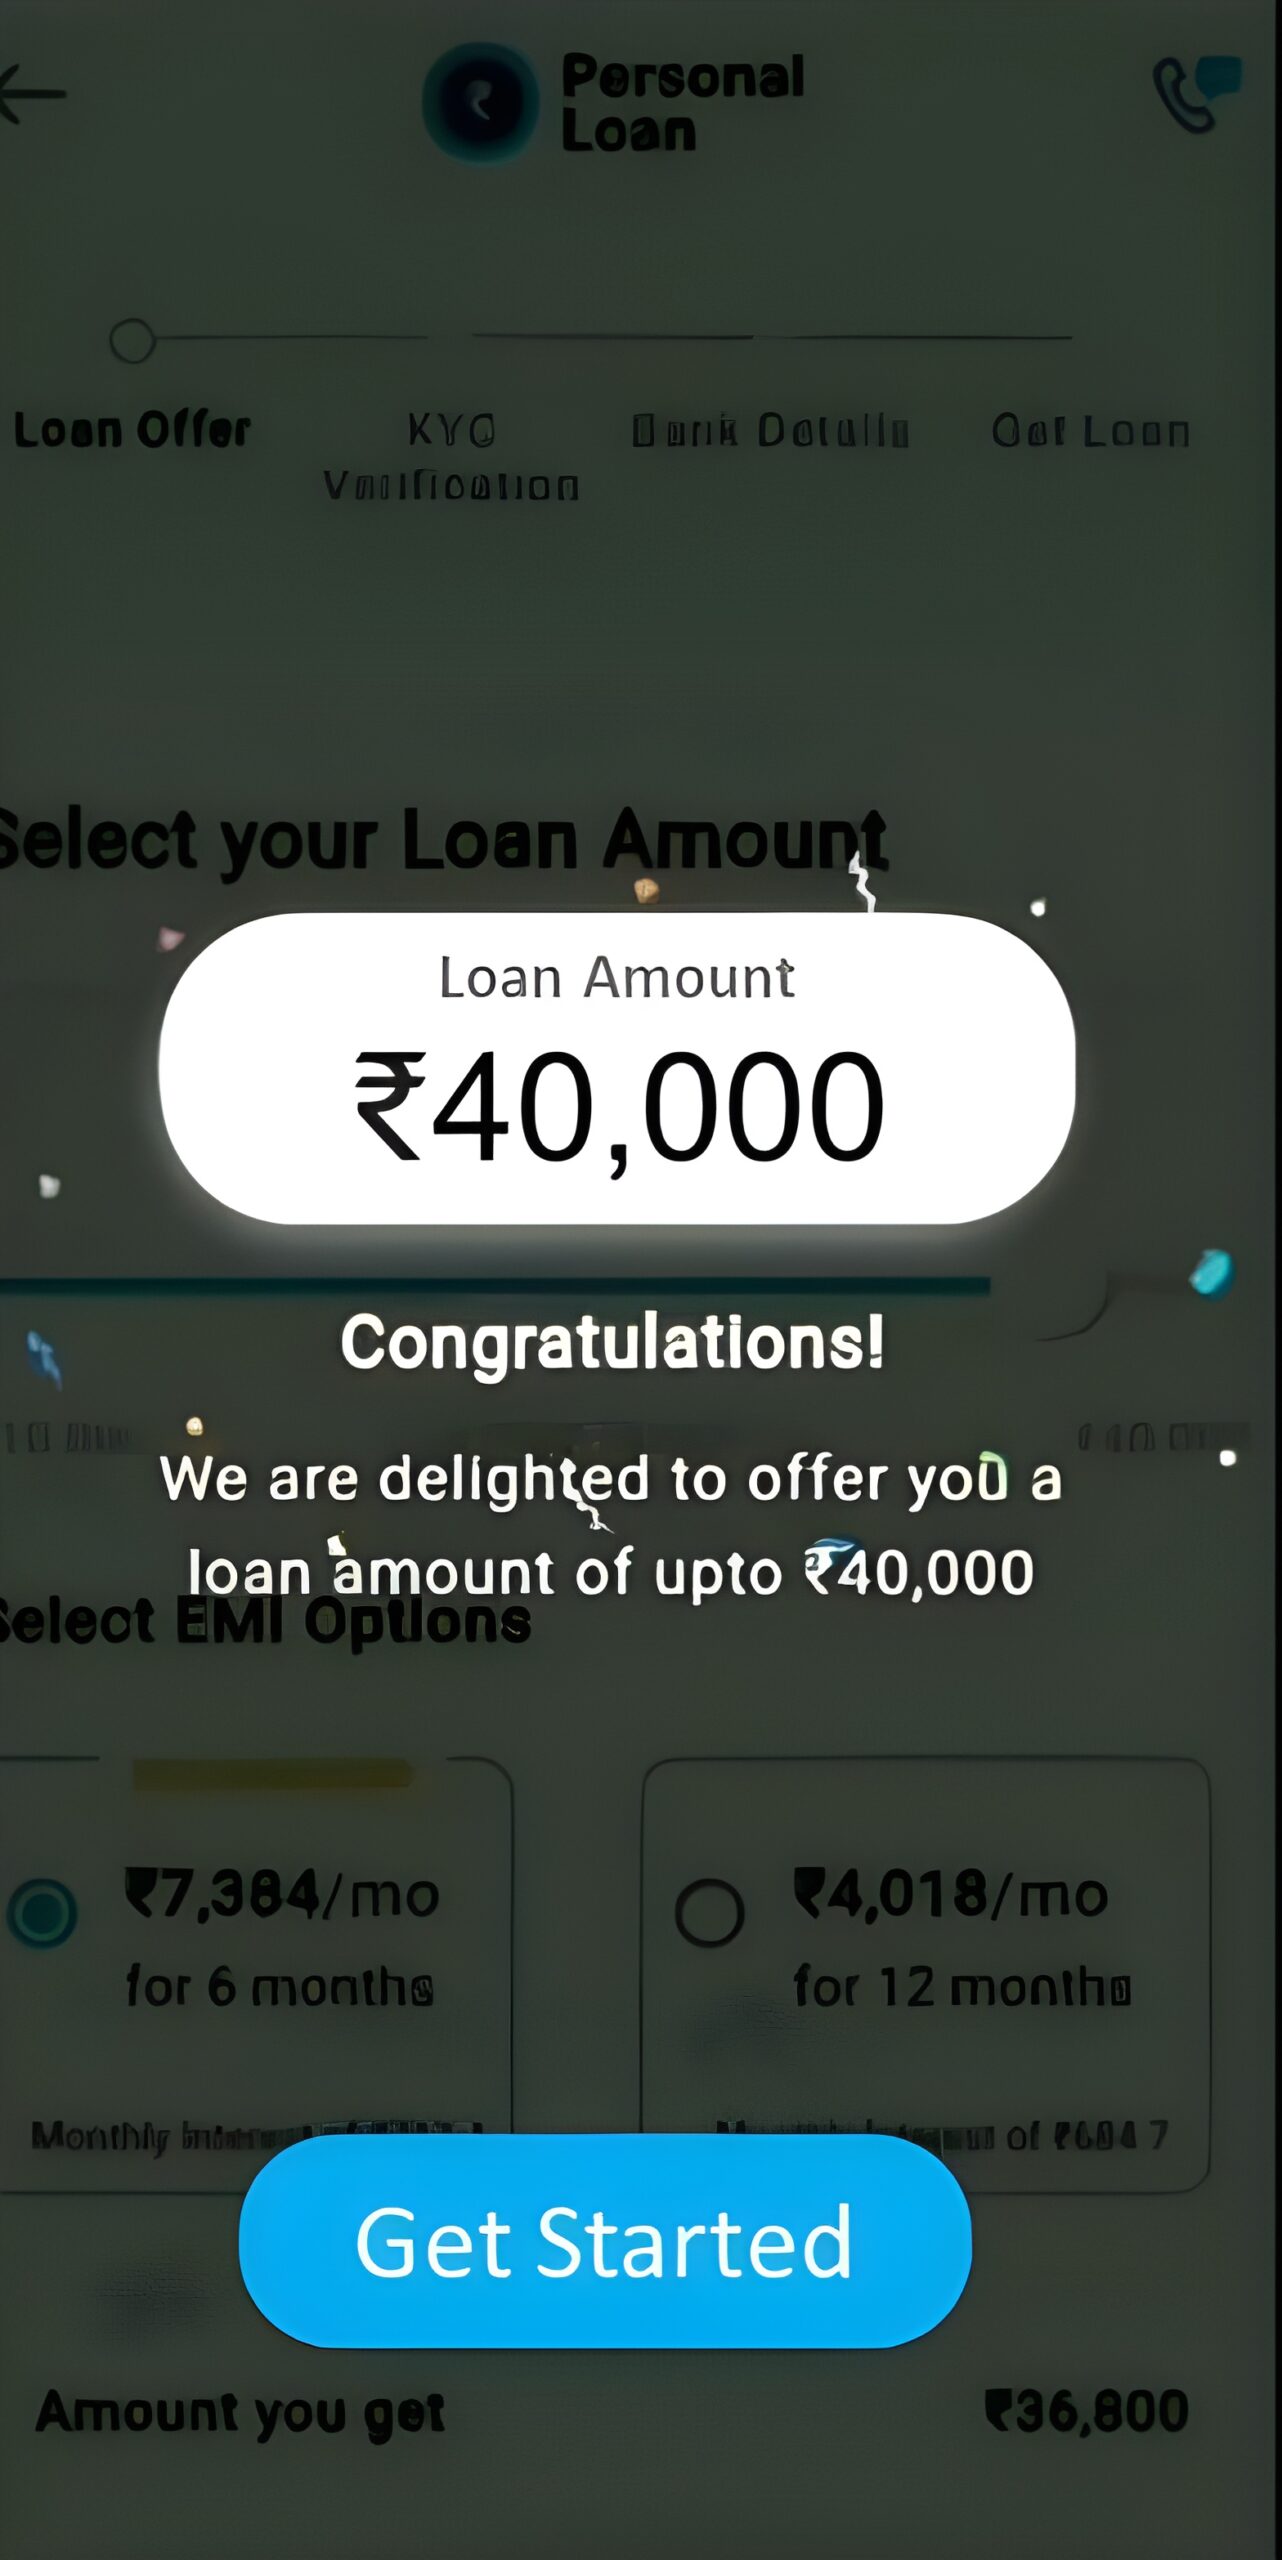 5 Now you see congratulation message from paytm personal loan